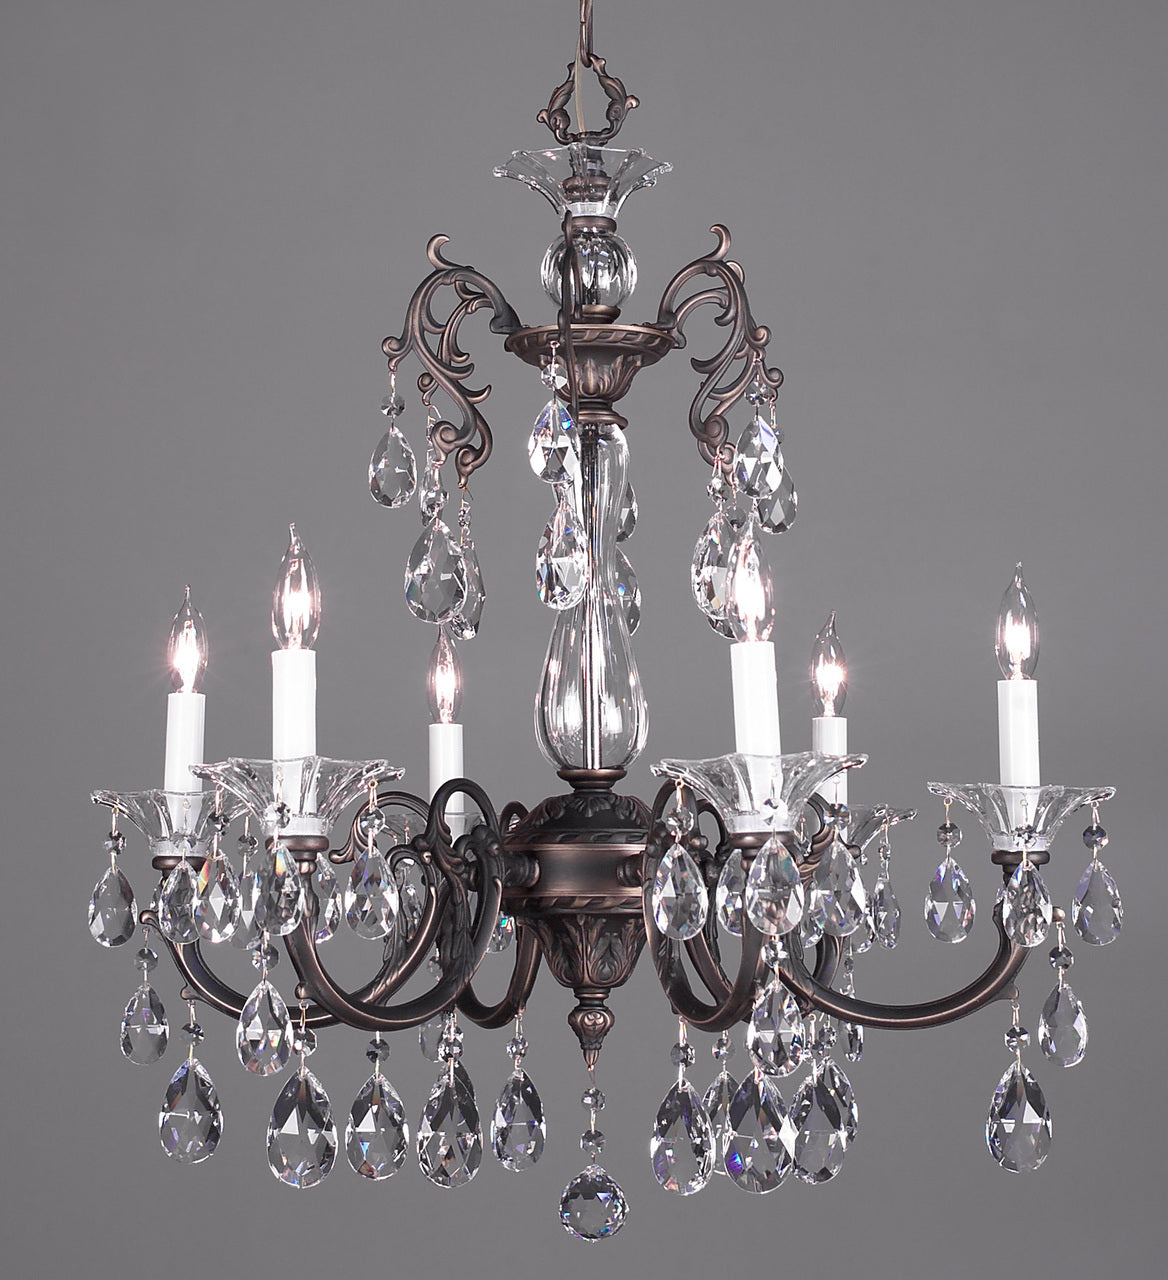 Classic Lighting 57056 RB S Via Lombardi Crystal Chandelier in Roman Bronze (Imported from Spain)